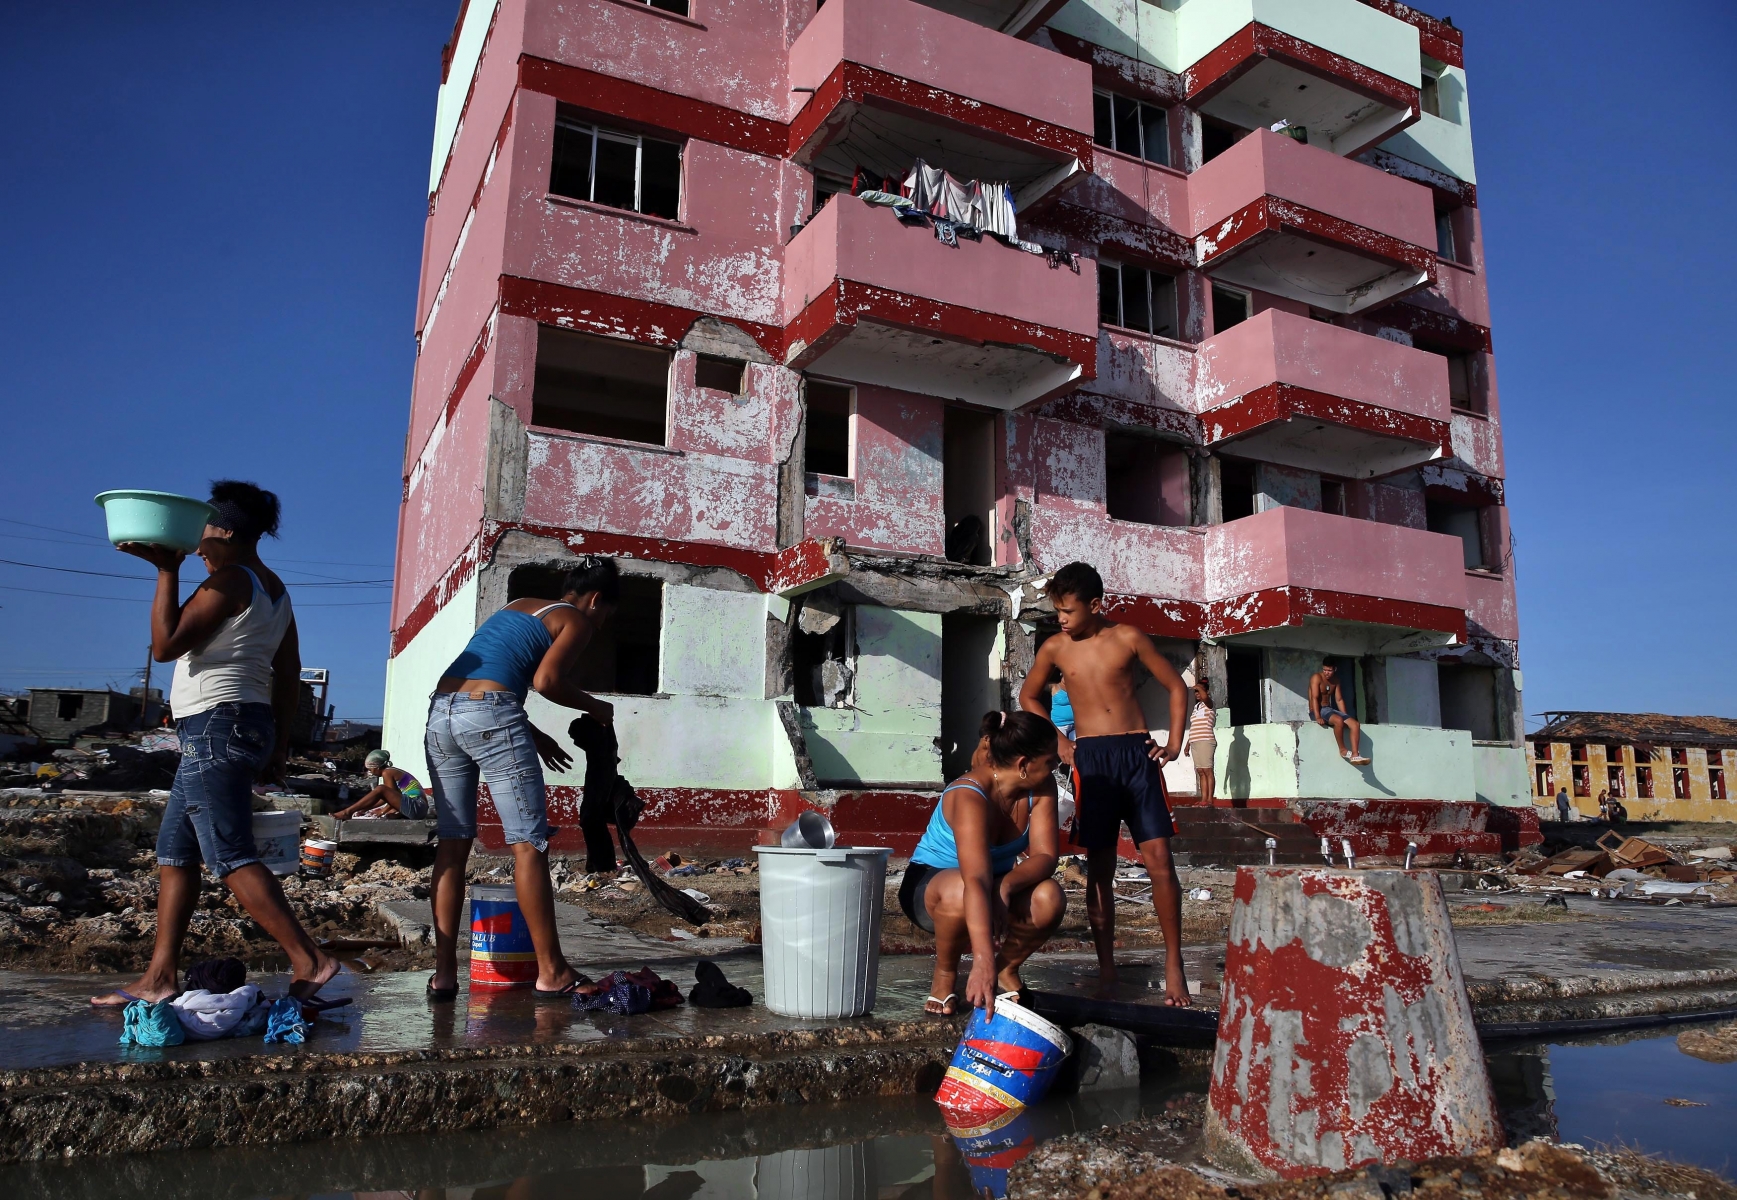 epa05574813 People collect water after hurricane Matthew hit the area, in Baracia, Cuba, 07 October 2016. Hurricane Matthew continued his path north, along the the US east coast early 07 October, after bringing heavy rains and winds to Cuba and Haiti, where the death toll has risen to more than 400, according to official sources.  EPA/ALEJANDRO ERNESTO CUBA HURRICANE MATTHEW